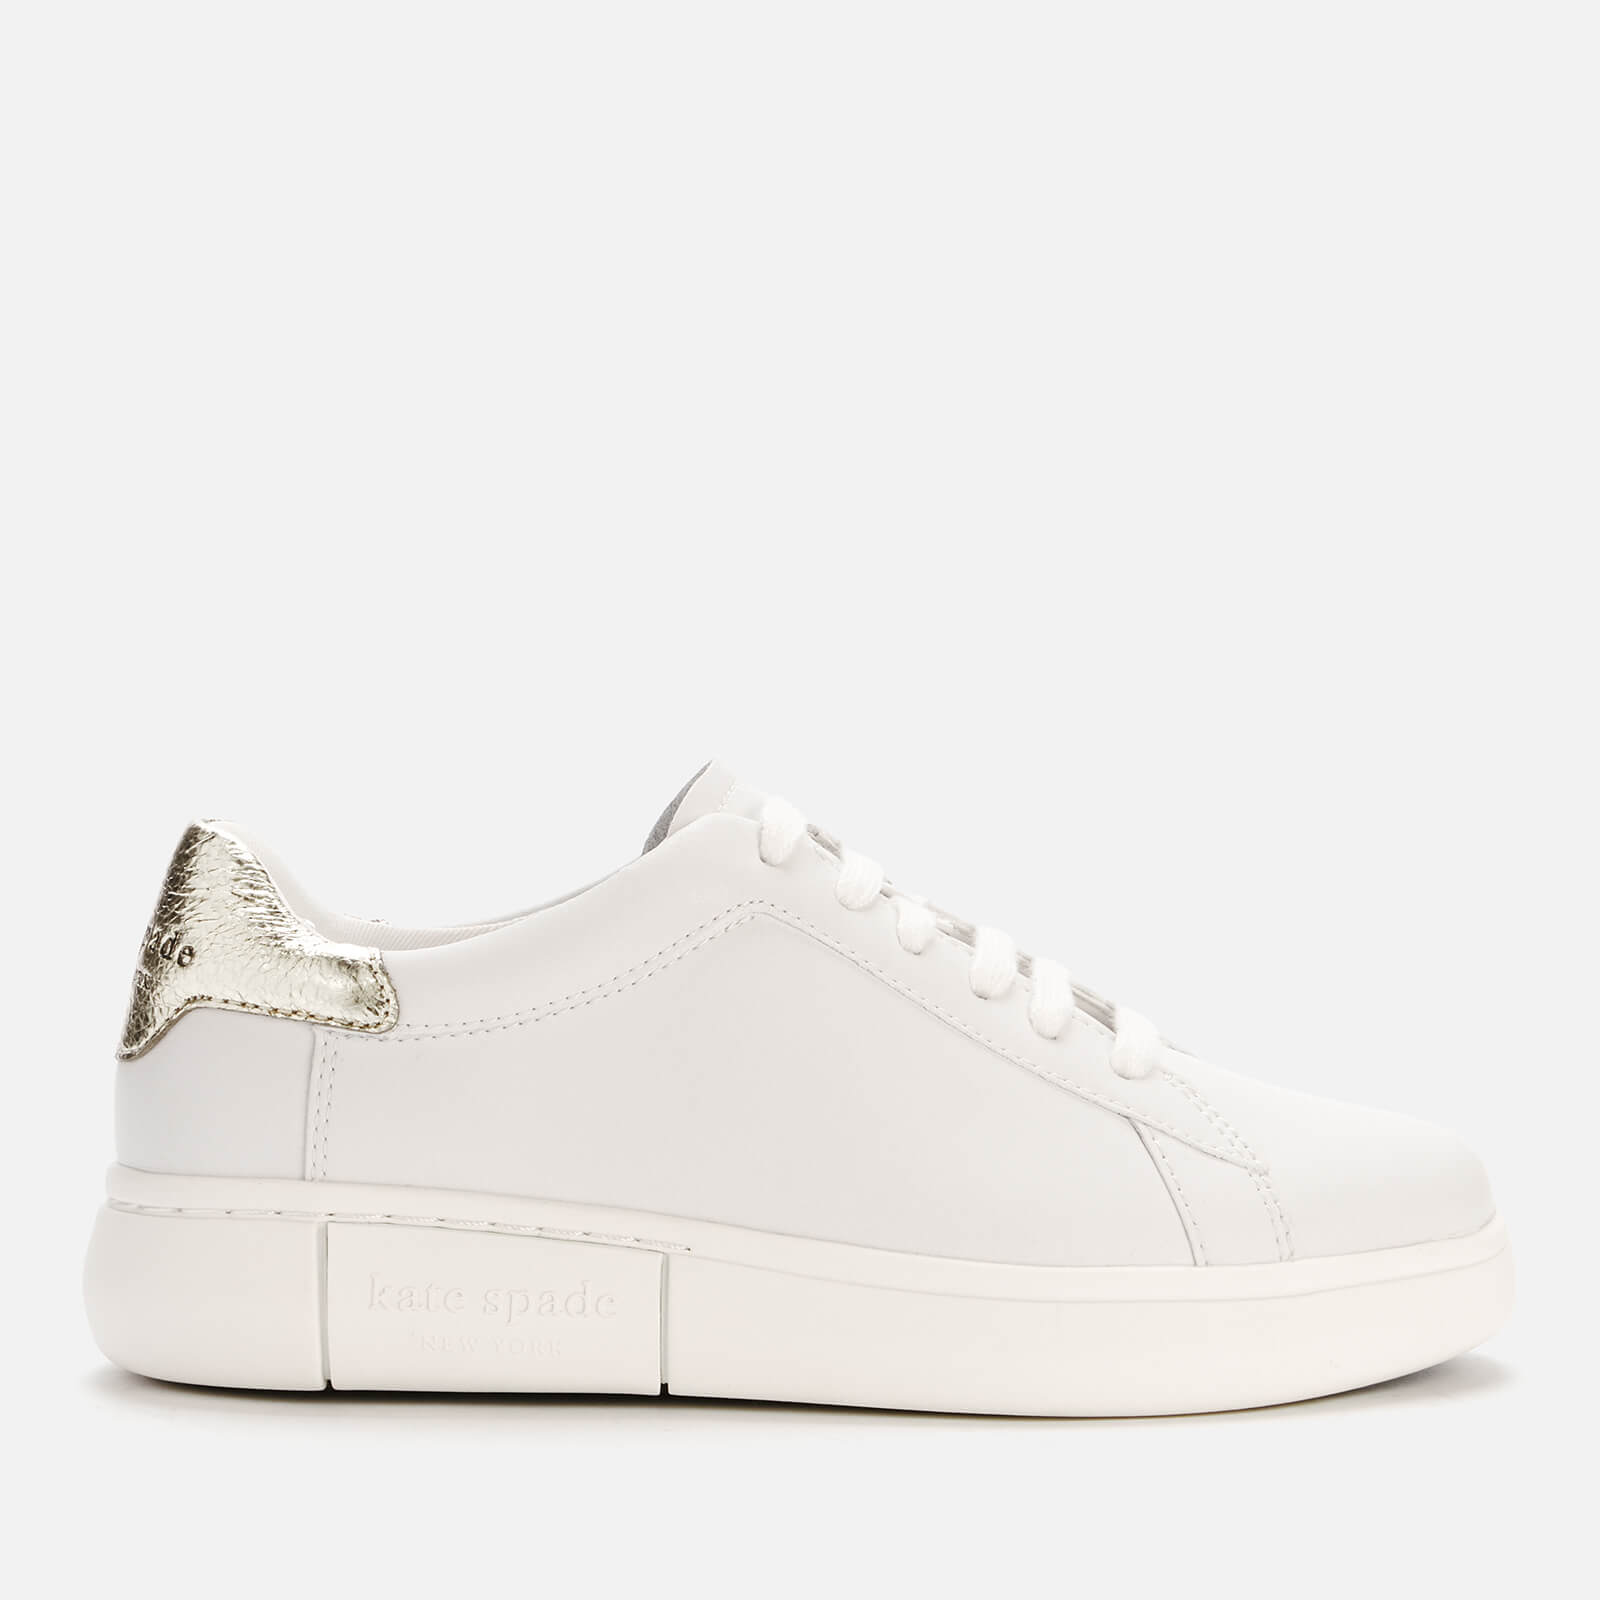 Kate Spade New York Women's Lift Leather Cupsole Trainers - Optic White/Pale Gold - UK 3 von kate spade new york